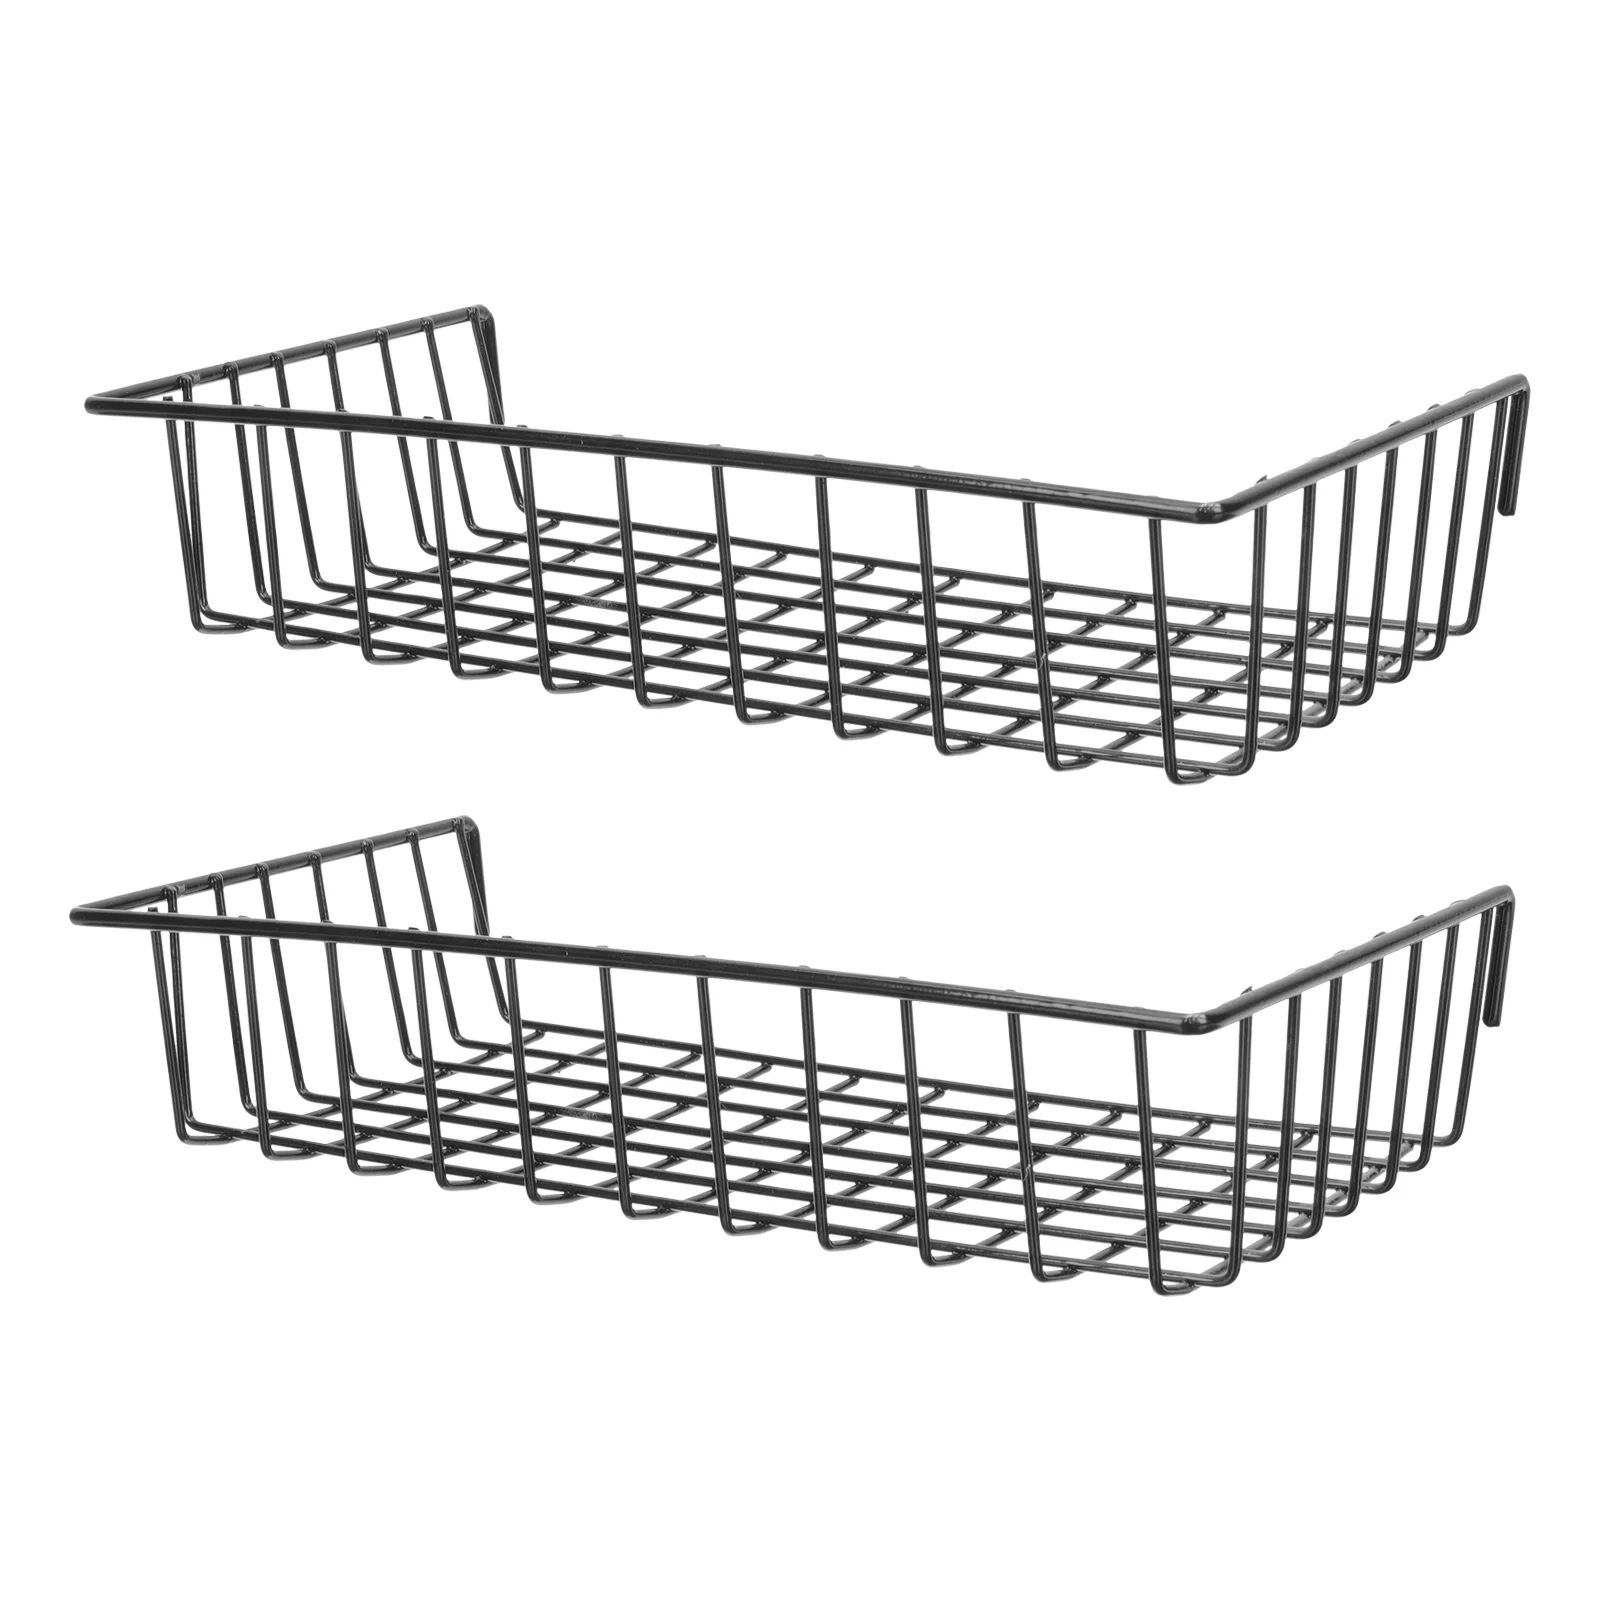 

2 Pcs Pegboard Shelves Kitchen Cabinets Wall Organizer Cupboard Wrought Iron Grid Panel Basket Wire Storage Rack